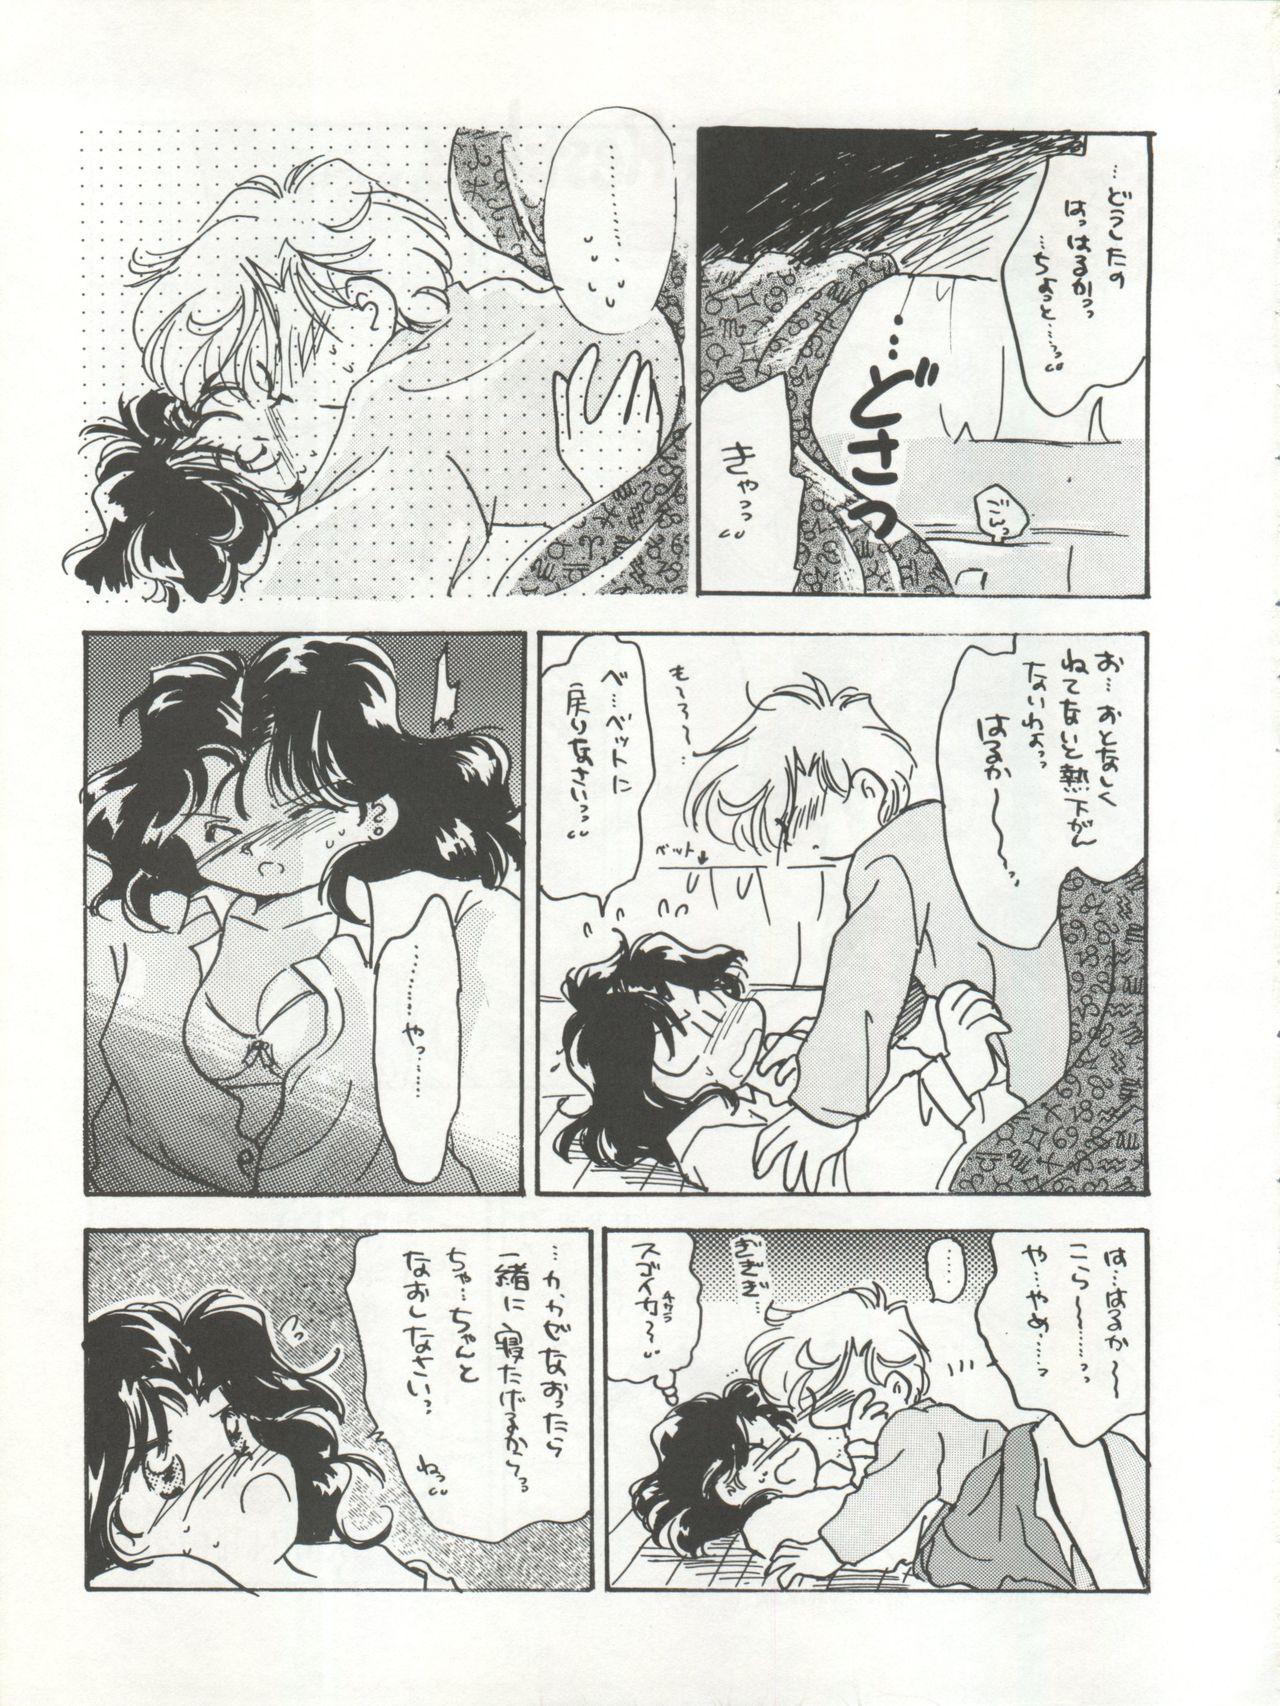 African GIRL IN THE BOX - Marmalade boy Hardsex - Page 5